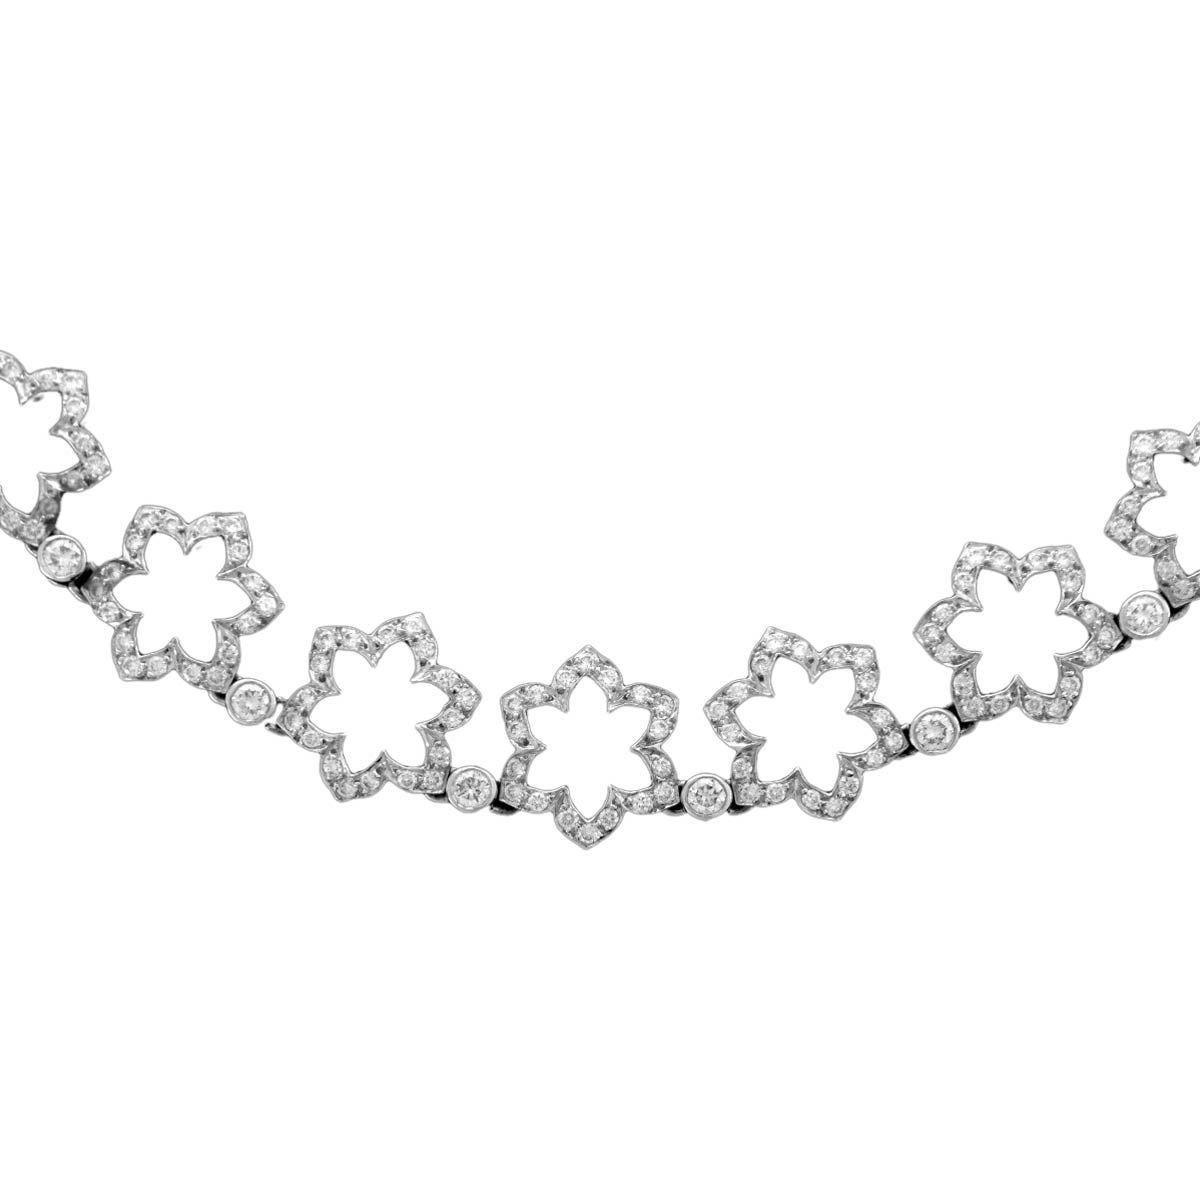 French Jeweler, Jean Vitau arrived in New York with a few wedding rings in his pocket. What started as something small grew into something special and he became synonymous with fine jewellery throughout the United States. This divine necklace has